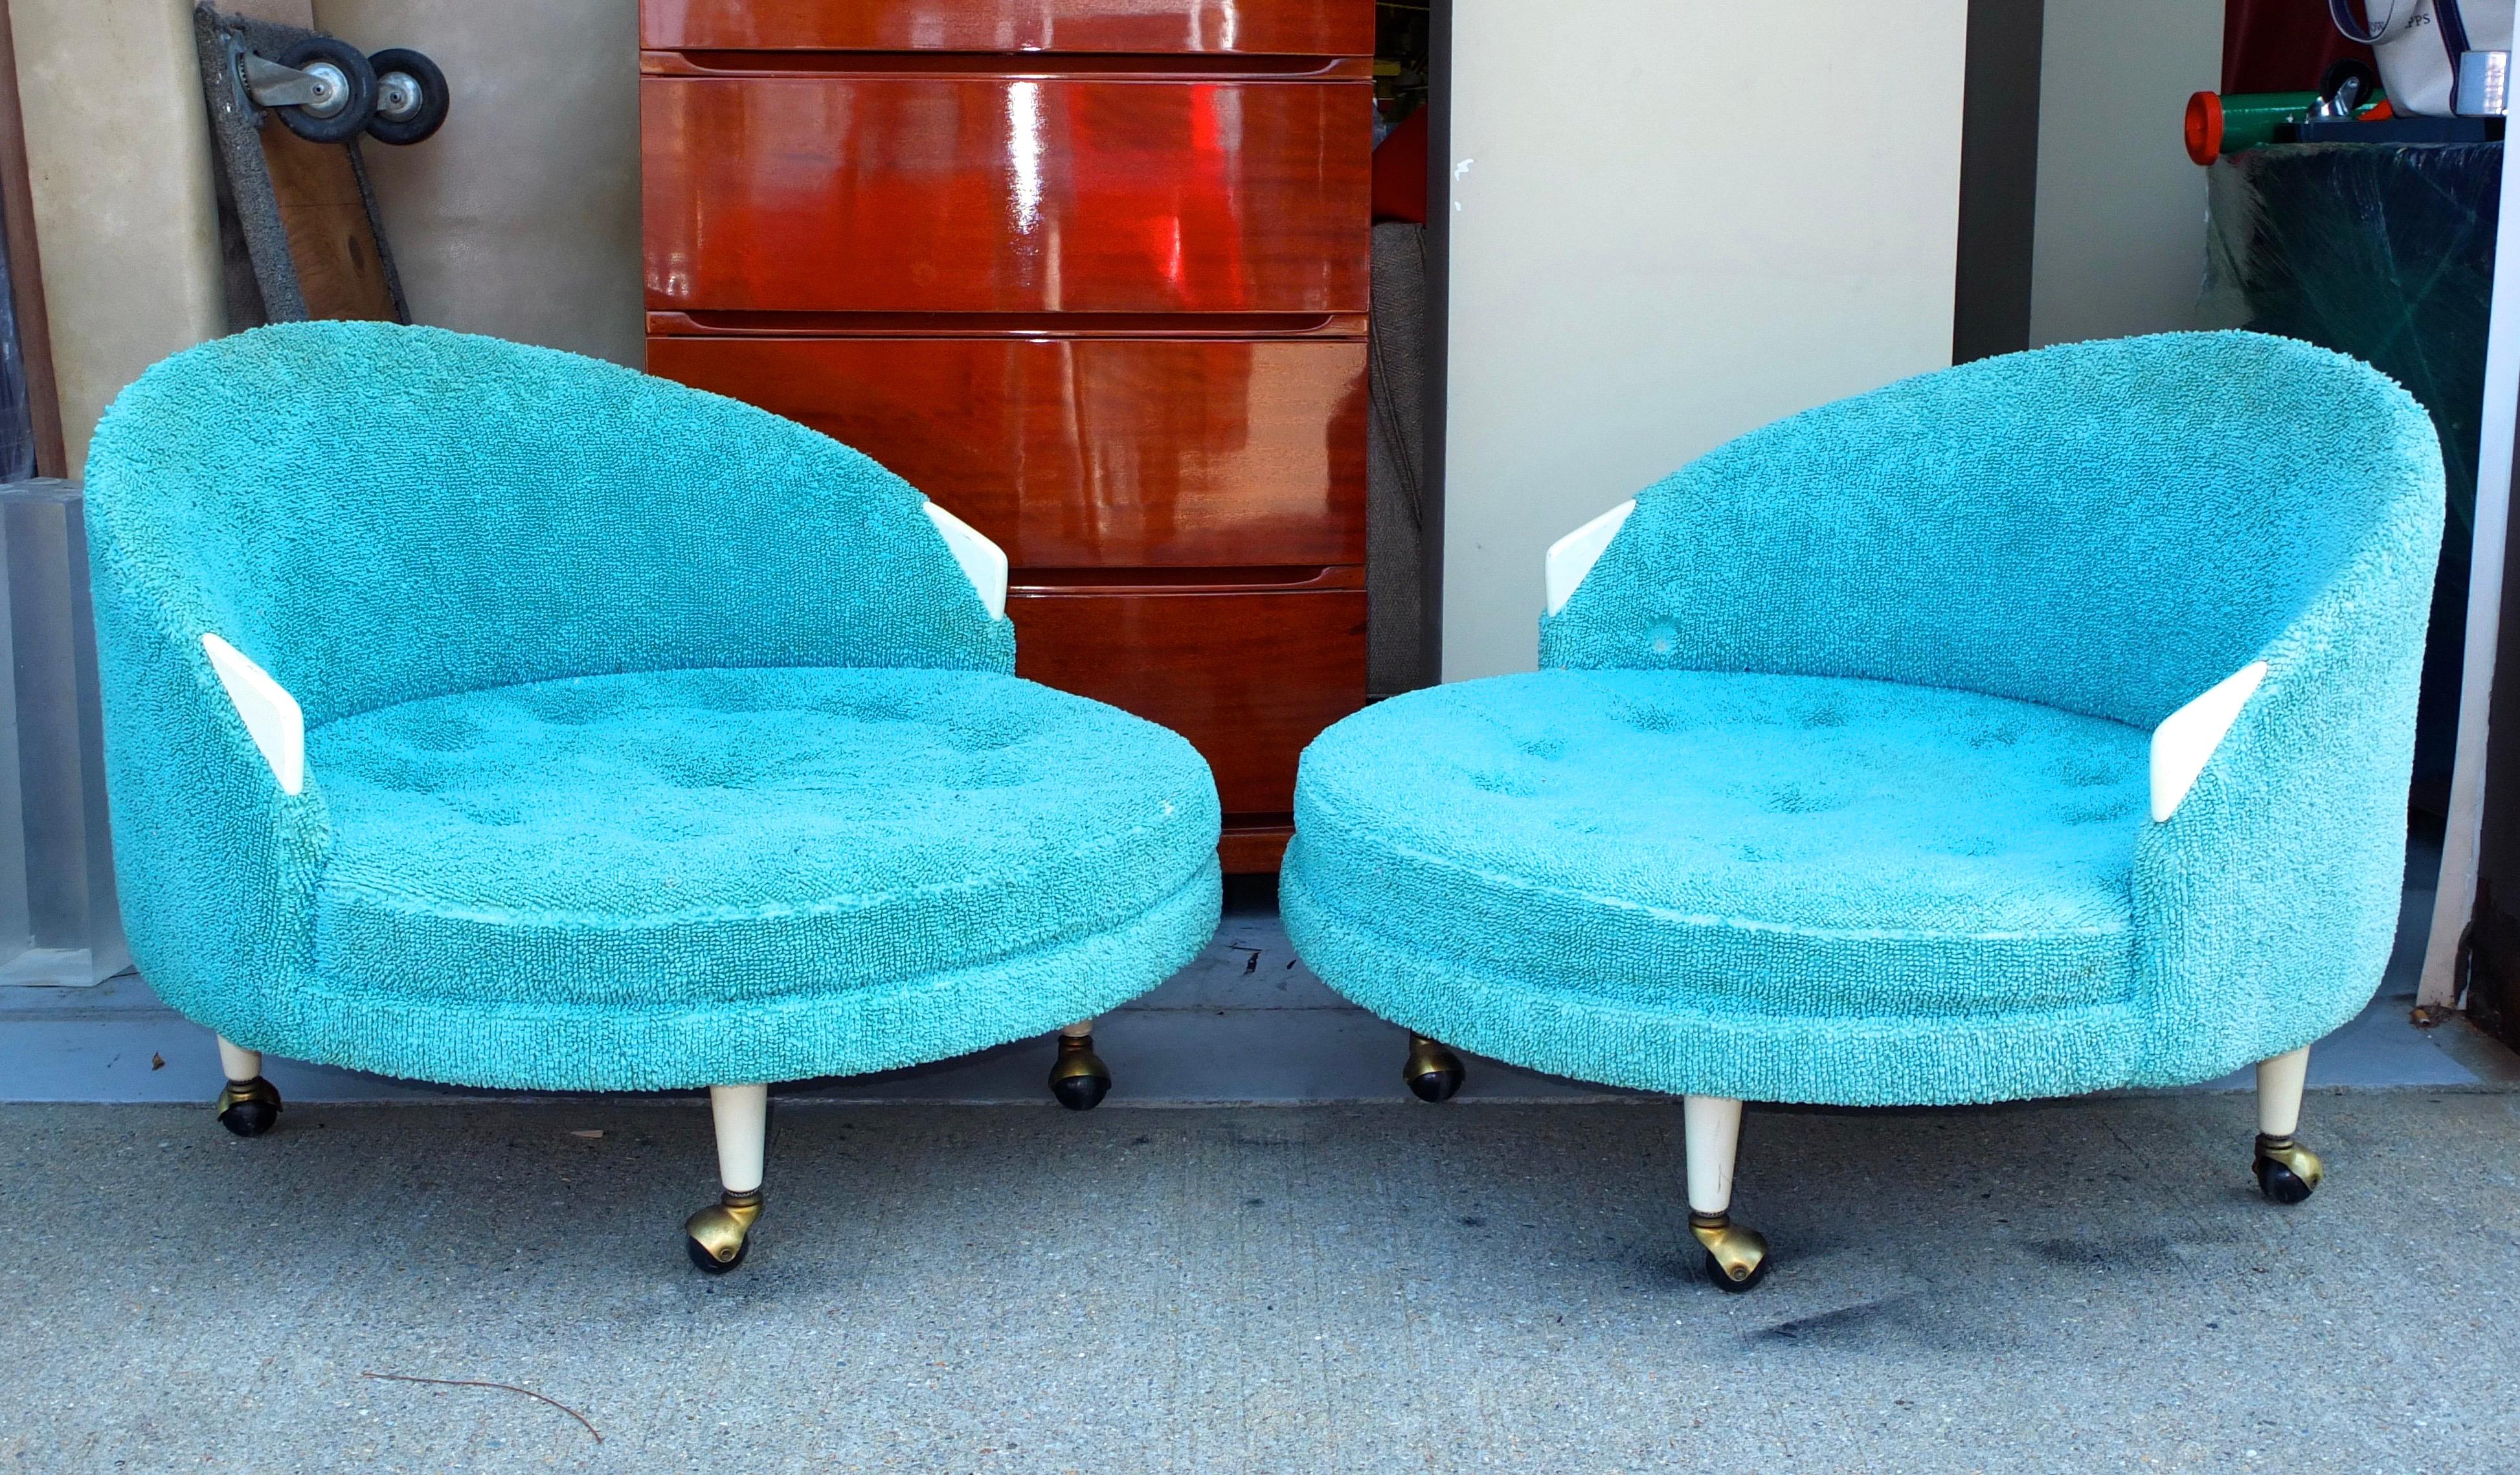 Pair of original Havana chaises designed by Adrian Pearsall and produced by Craft Associated circa 1965.
Model 1717-RC
See original catalog page.
These are unusual in that the legs and arms are factory lacquered white.
On four brass